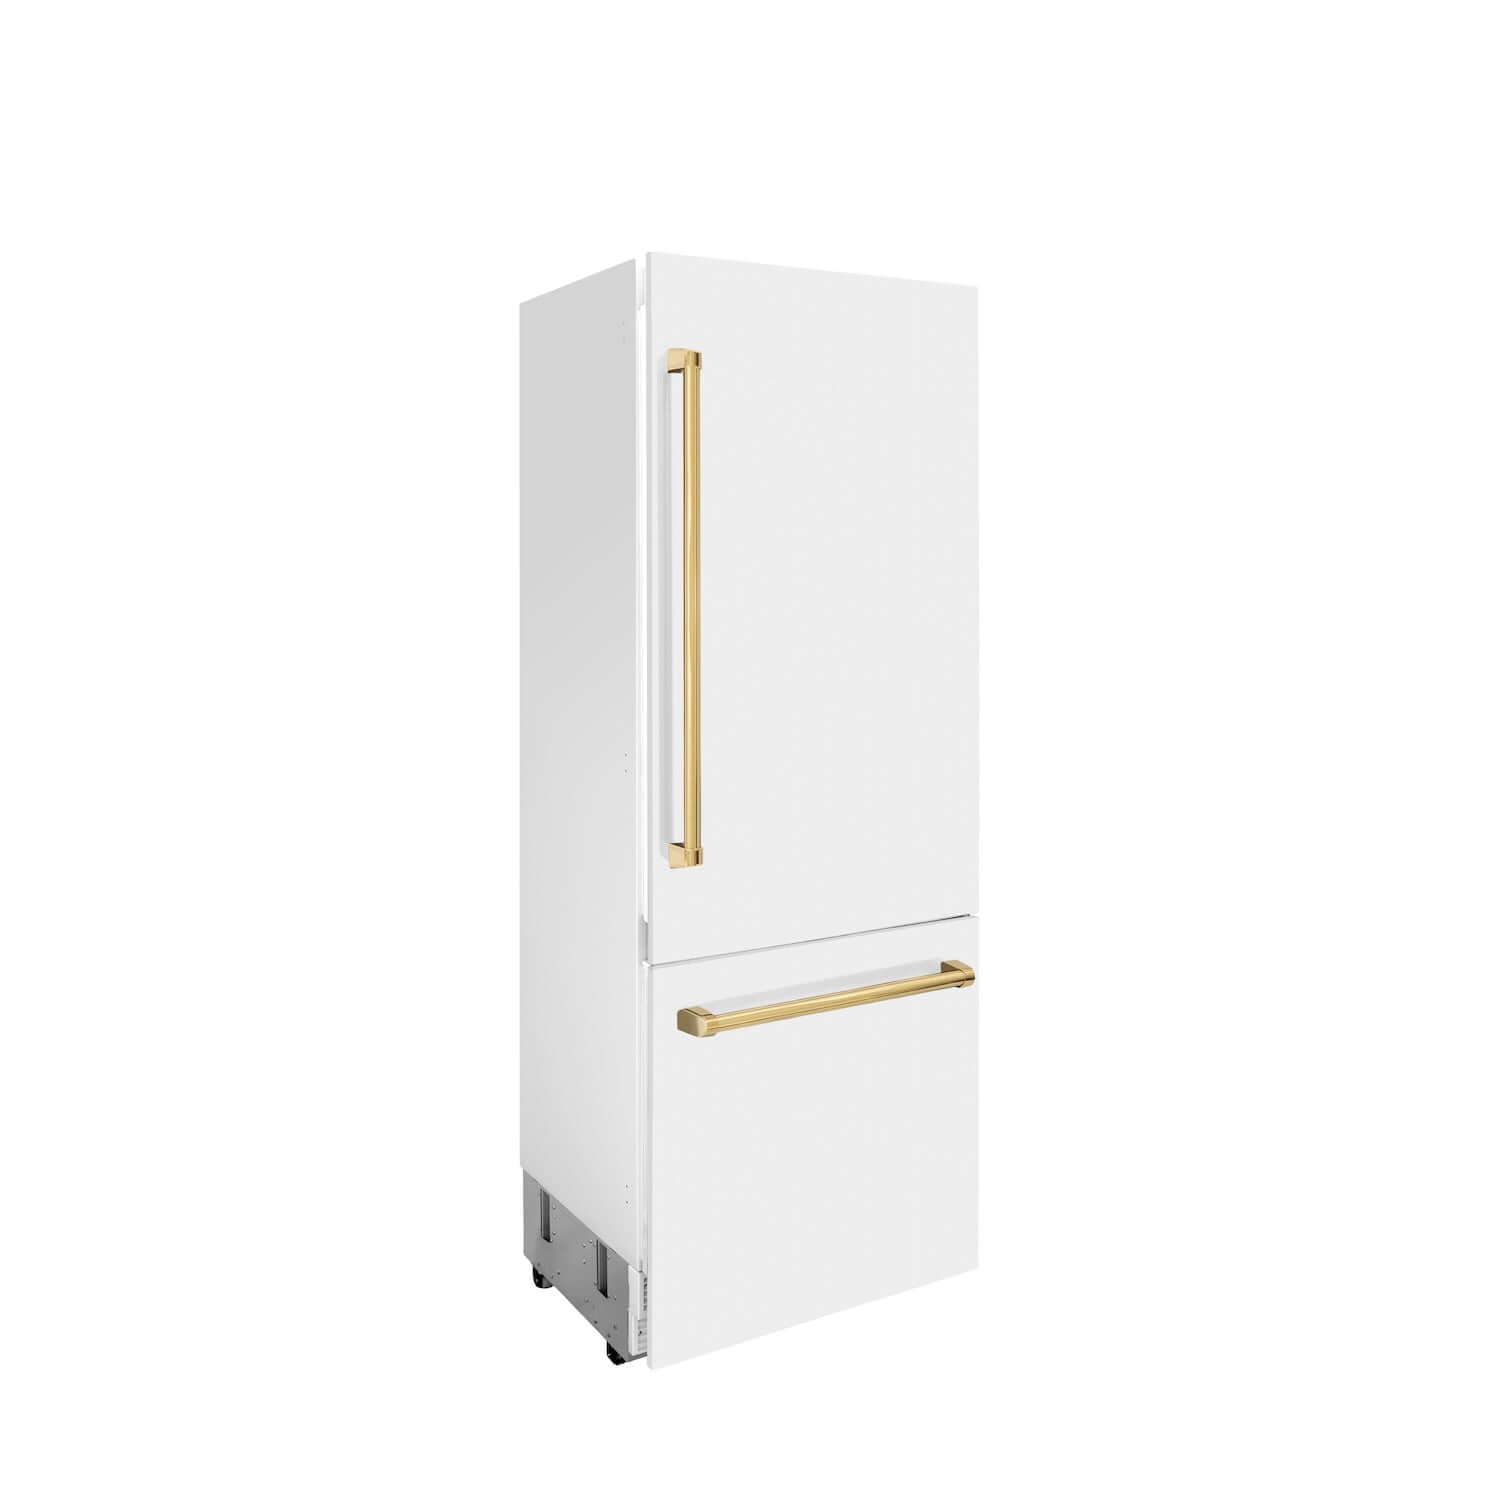 ZLINE Autograph Edition 30 in. 16.1 cu. ft. Built-in 2-Door Bottom Freezer Refrigerator with Internal Water and Ice Dispenser in White Matte with Polished Gold Accents (RBIVZ-WM-30-G) side, closed.